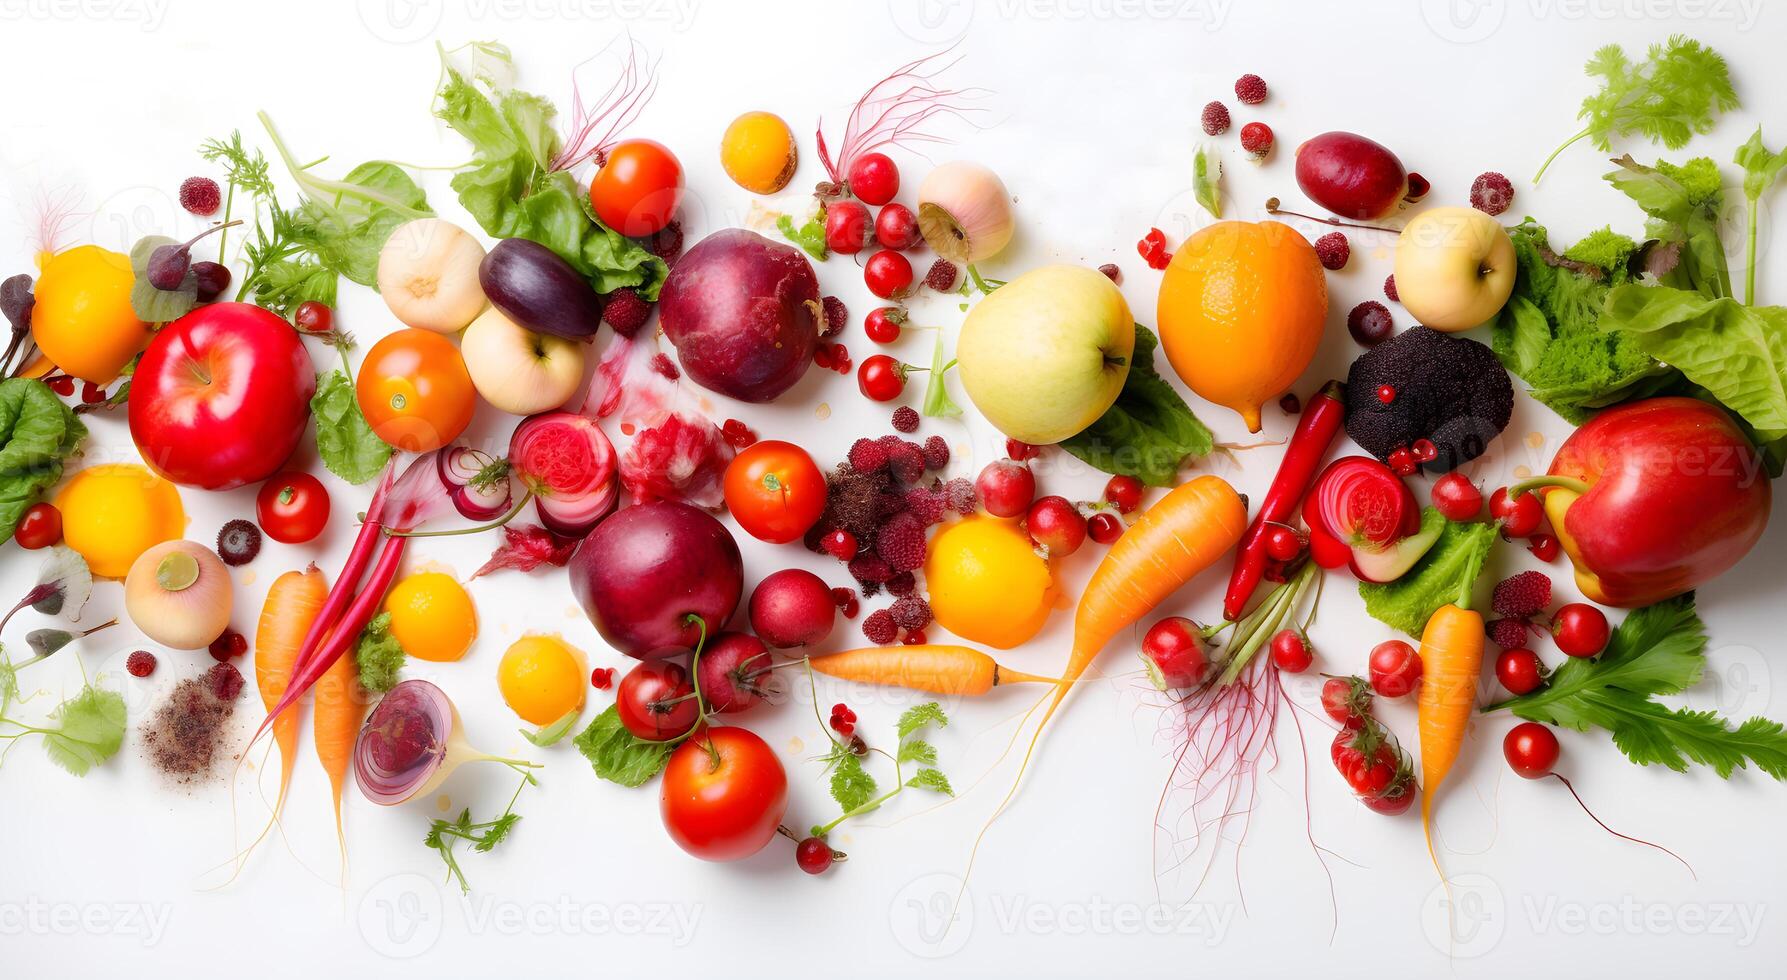 Vegetarian food products variety, overhead shot with copy space. Fruit, vegetables, cheese, mushrooms, nuts, legumes, a flat lay. The concept of a healthy diet, photo